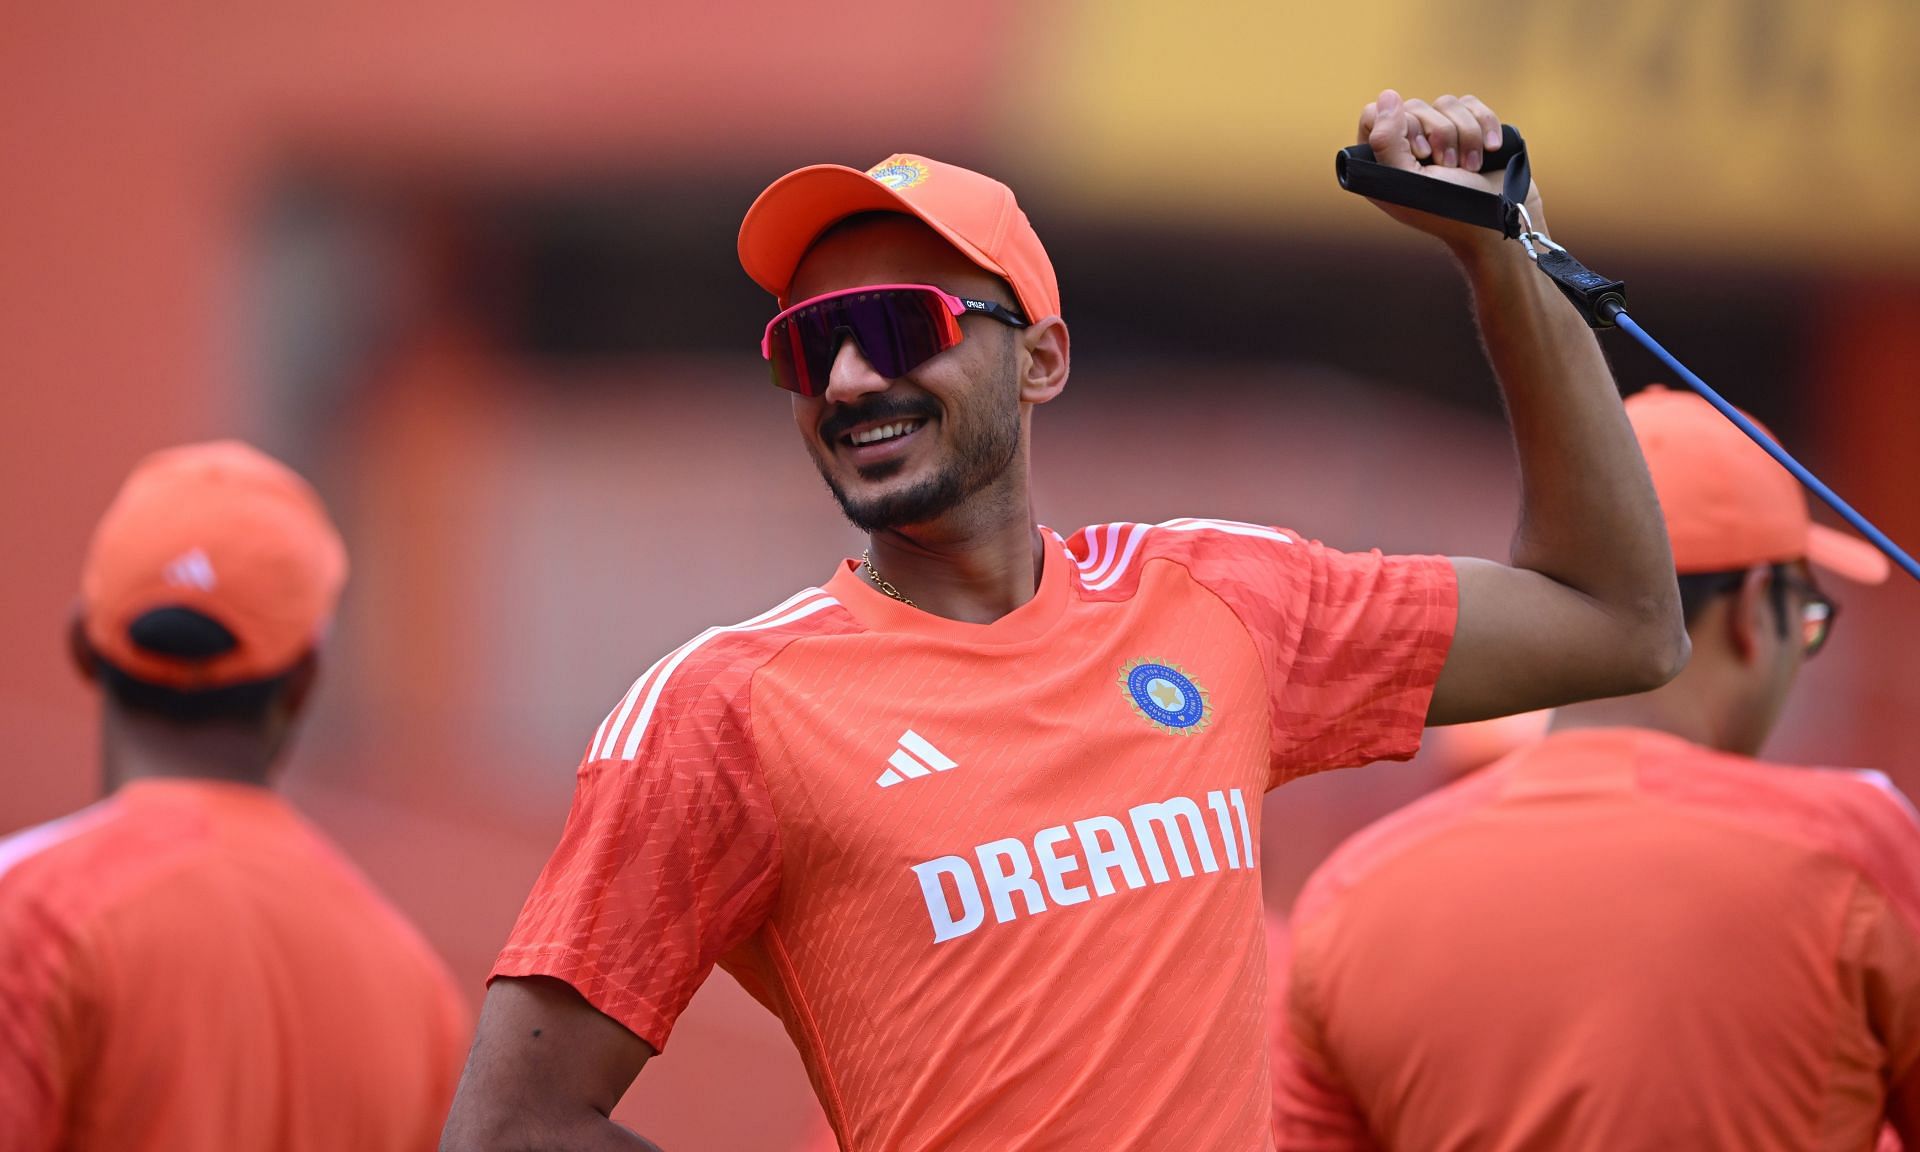 Axar Patel averages more than 40 with the bat at home